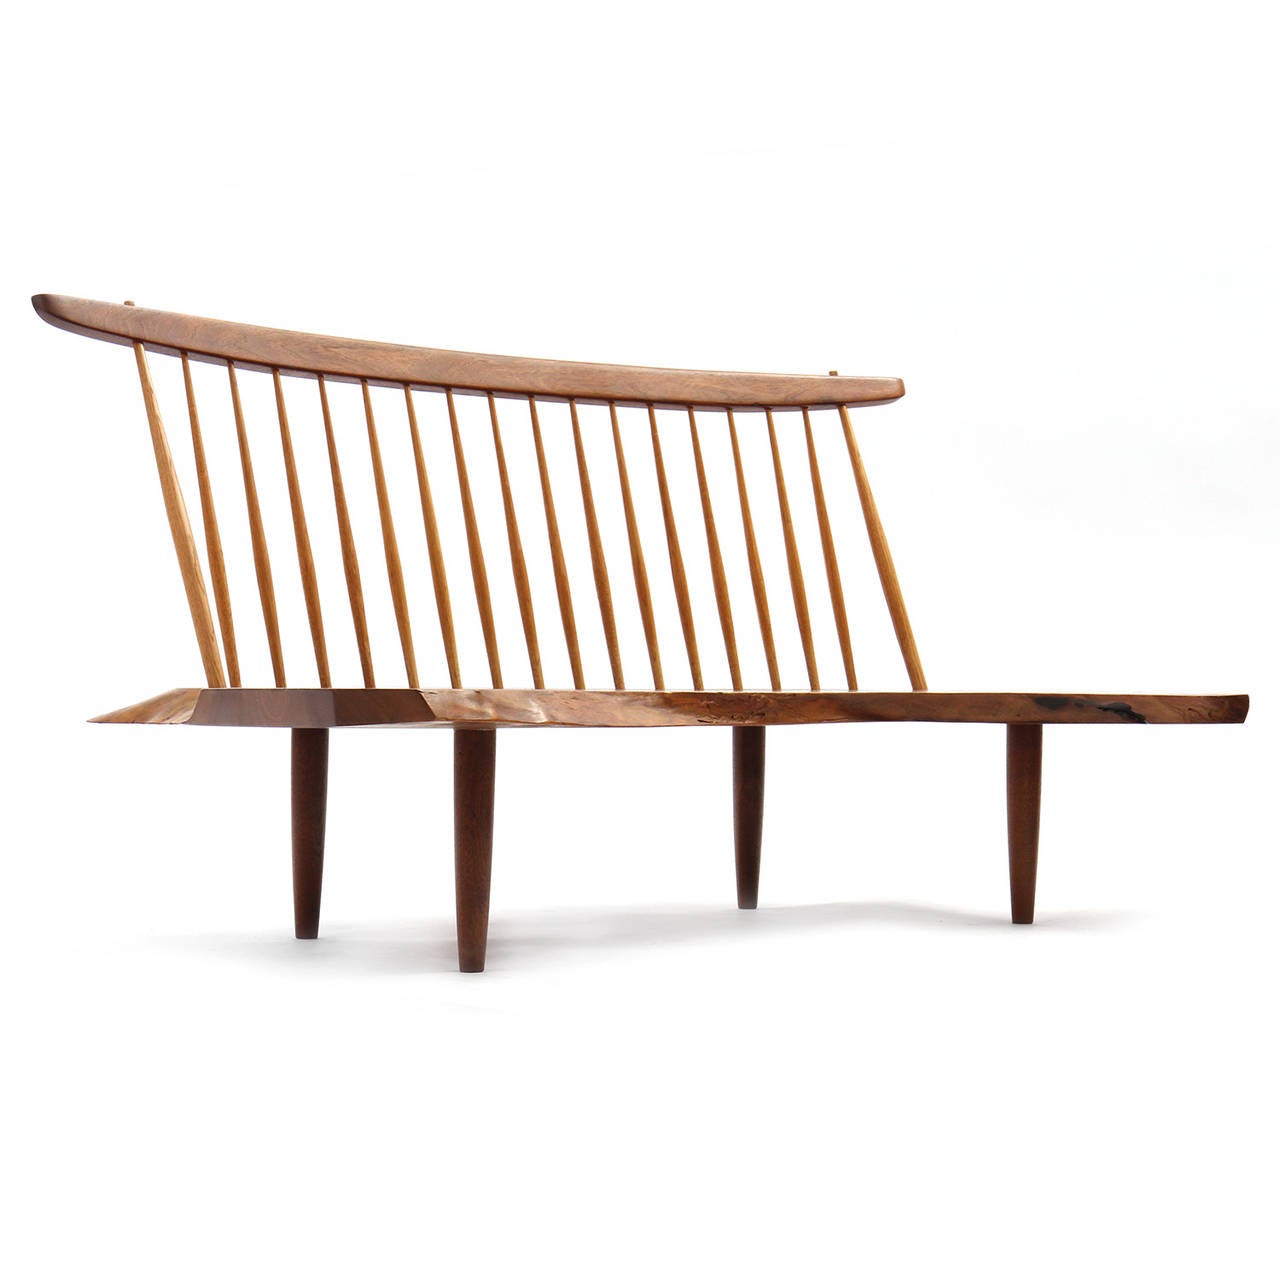 American Superb Conoid Bench by George Nakashima